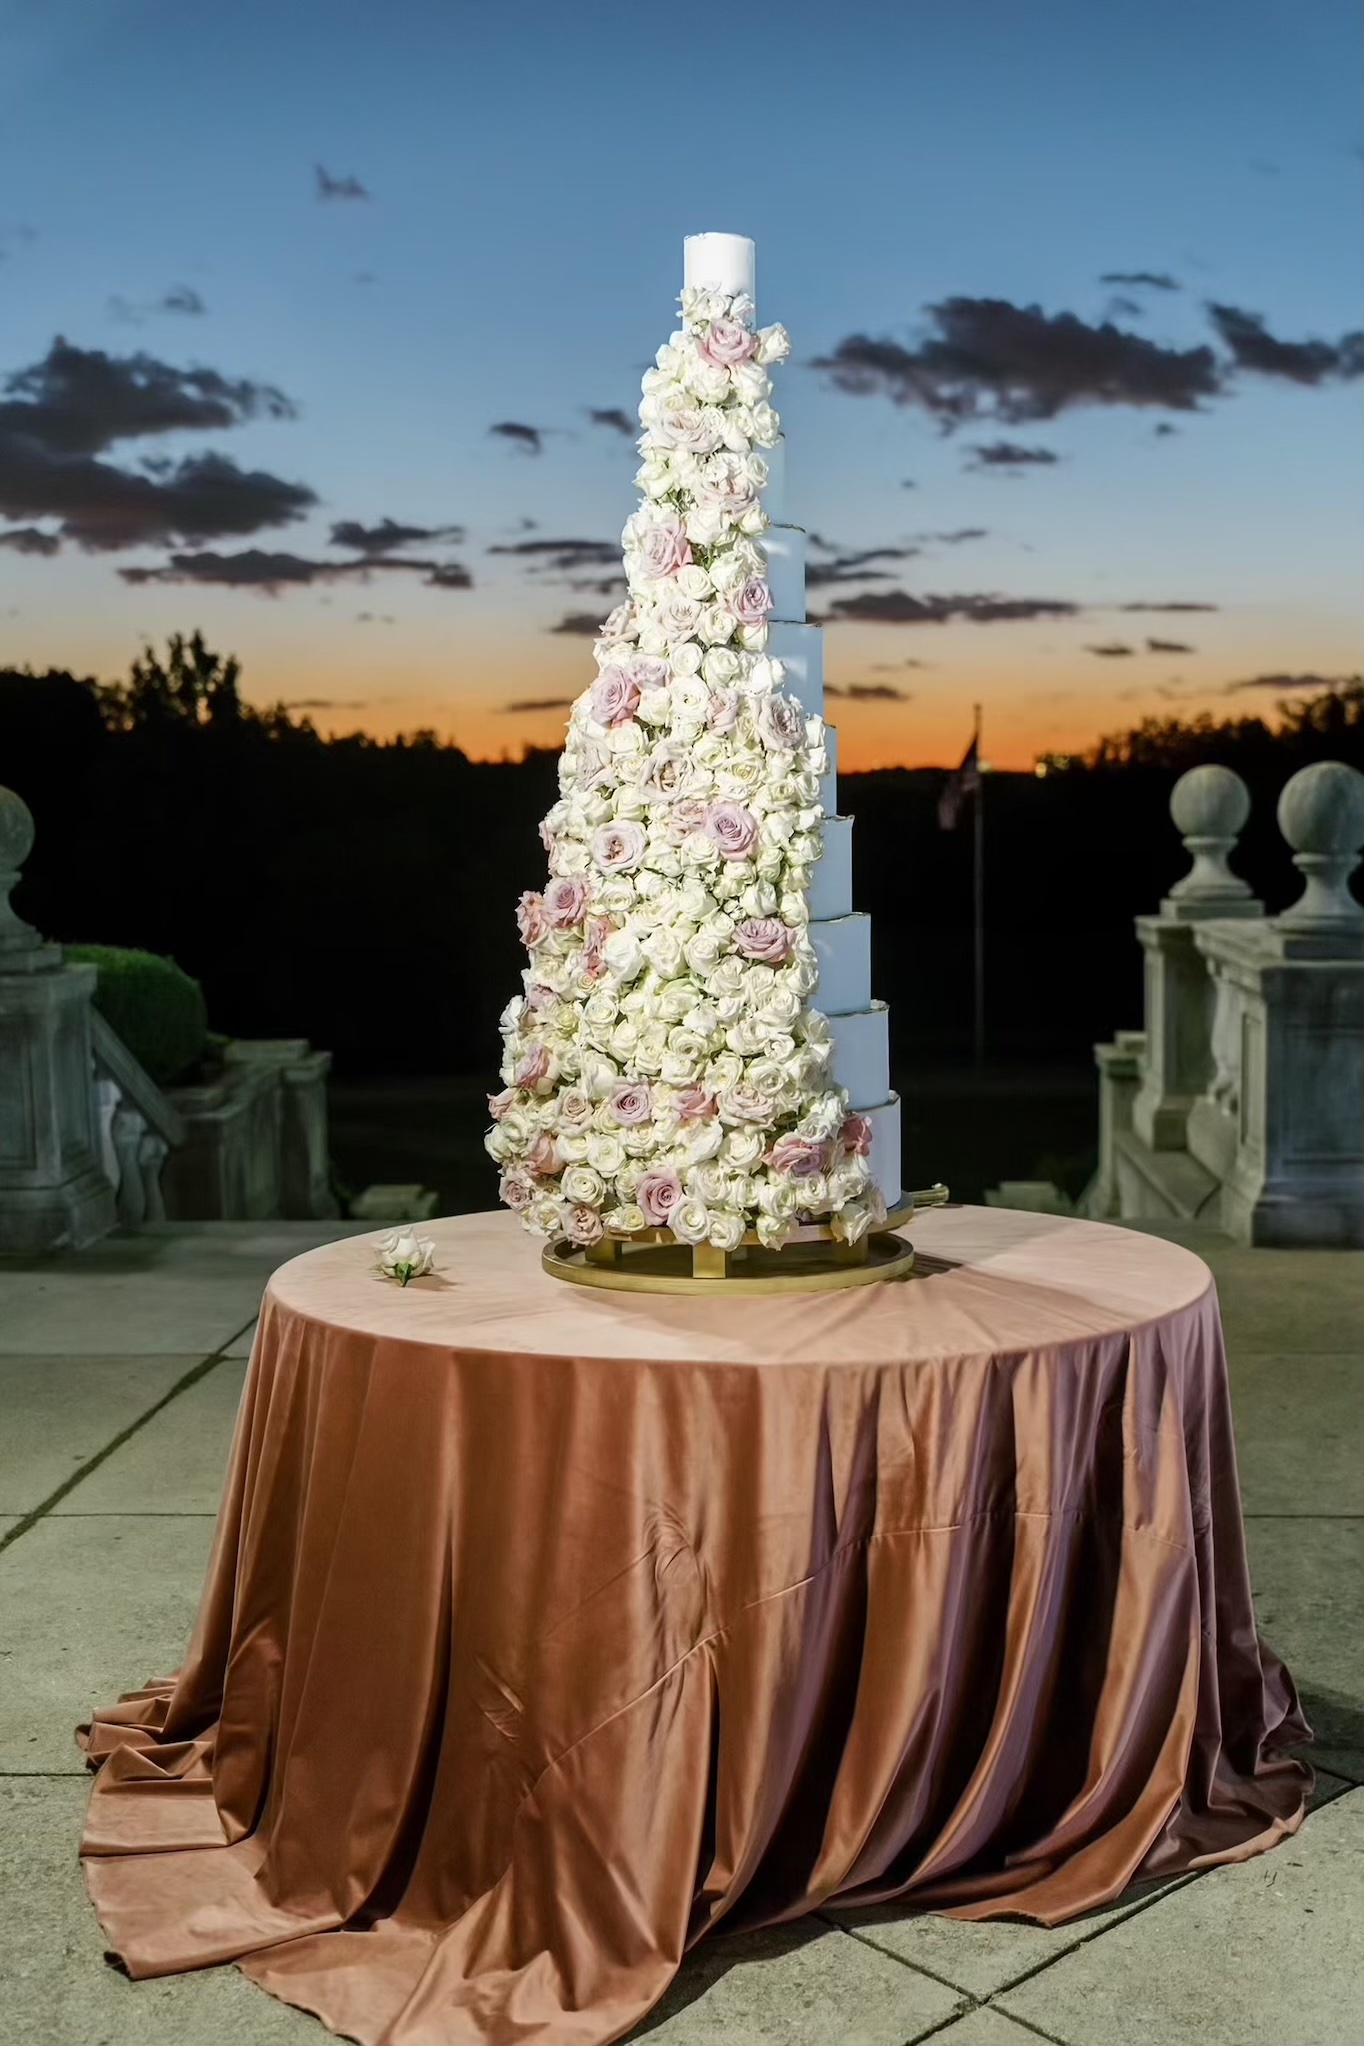 Large ten-tier wedding cake at the Ault Park wedding